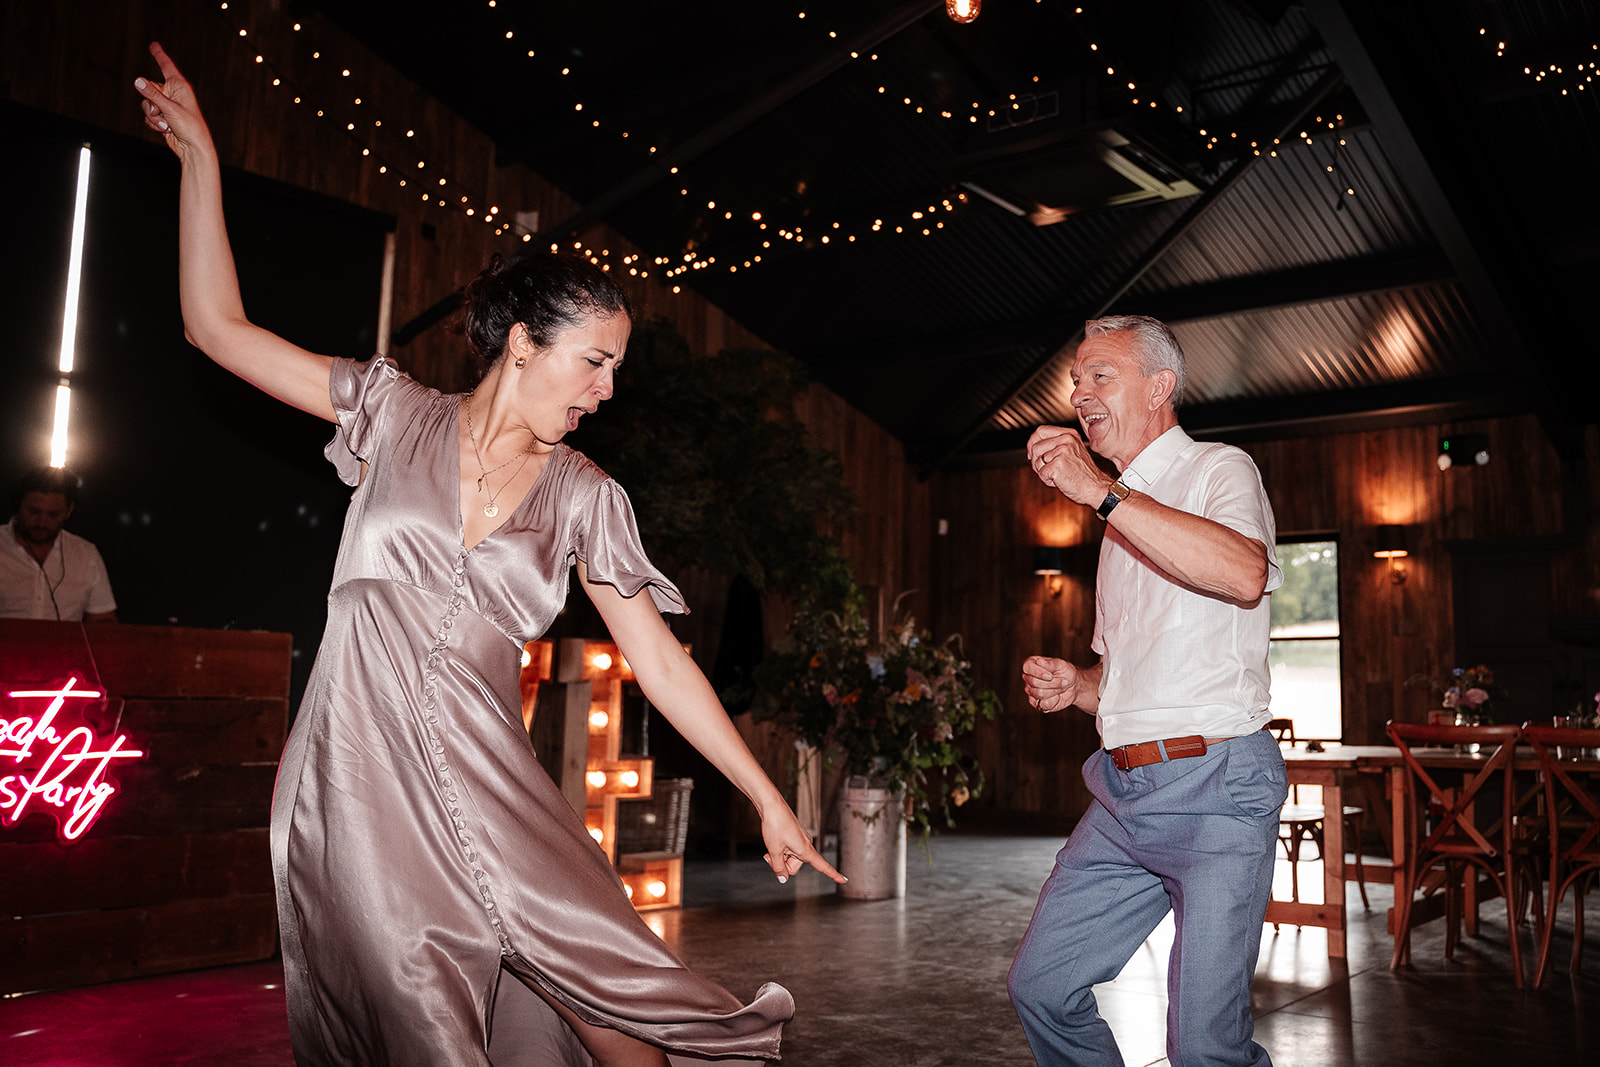 Guests dancing and having fun at a summer wedding at Silchester Farm